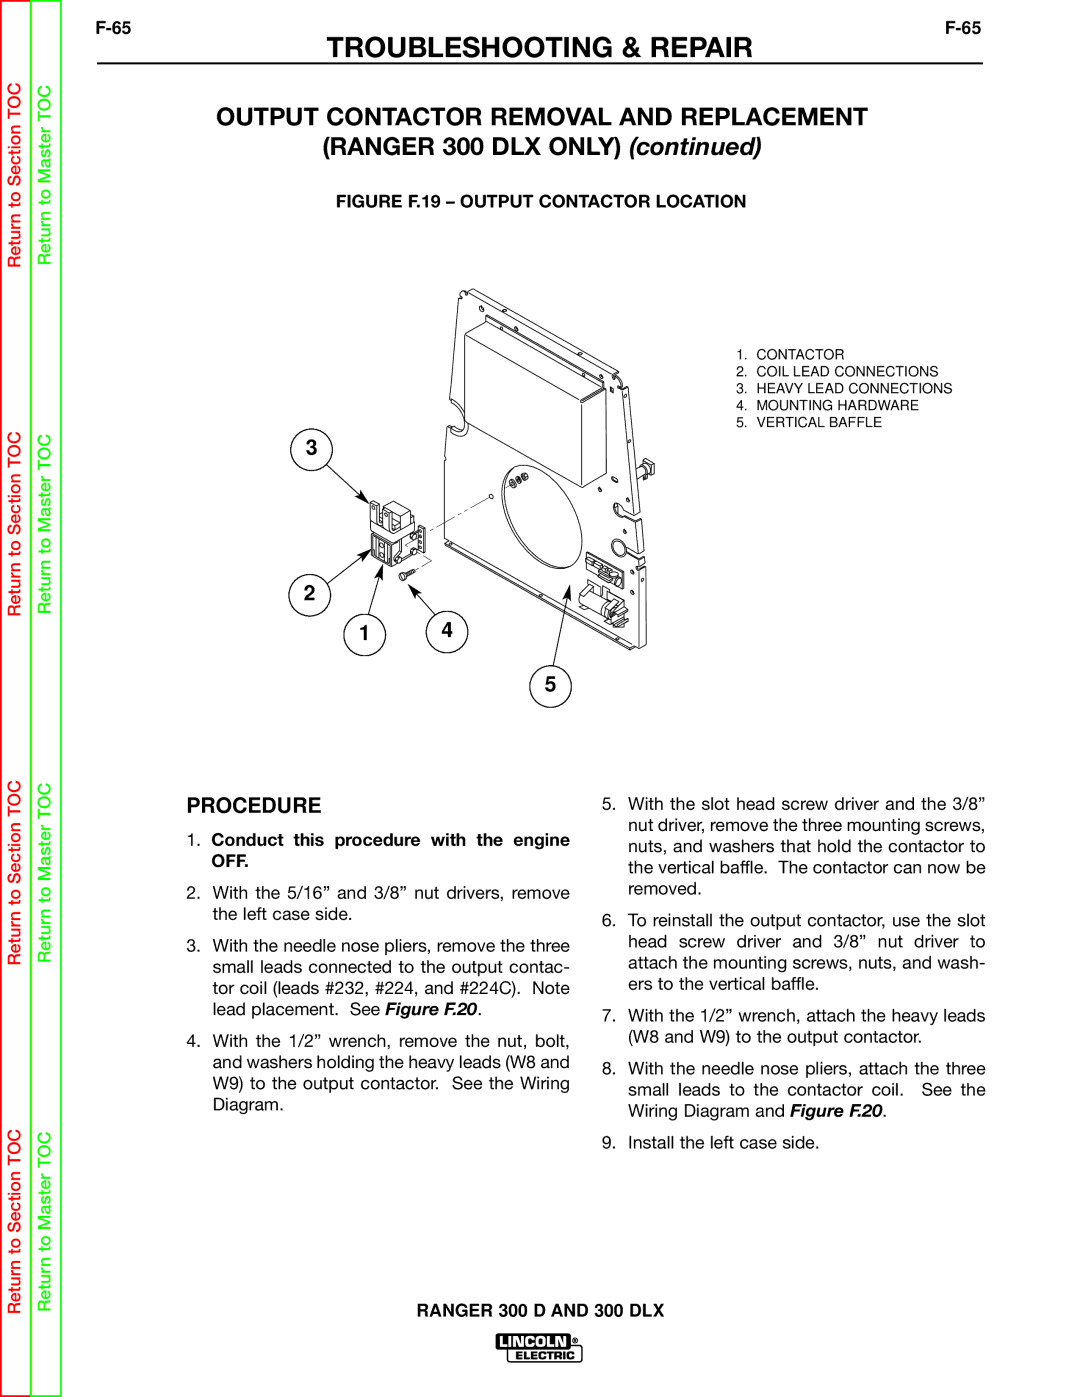 Lincoln Electric SVM148-B service manual Output Contactor Removal and Replacement, Figure F.19 Output Contactor Location 